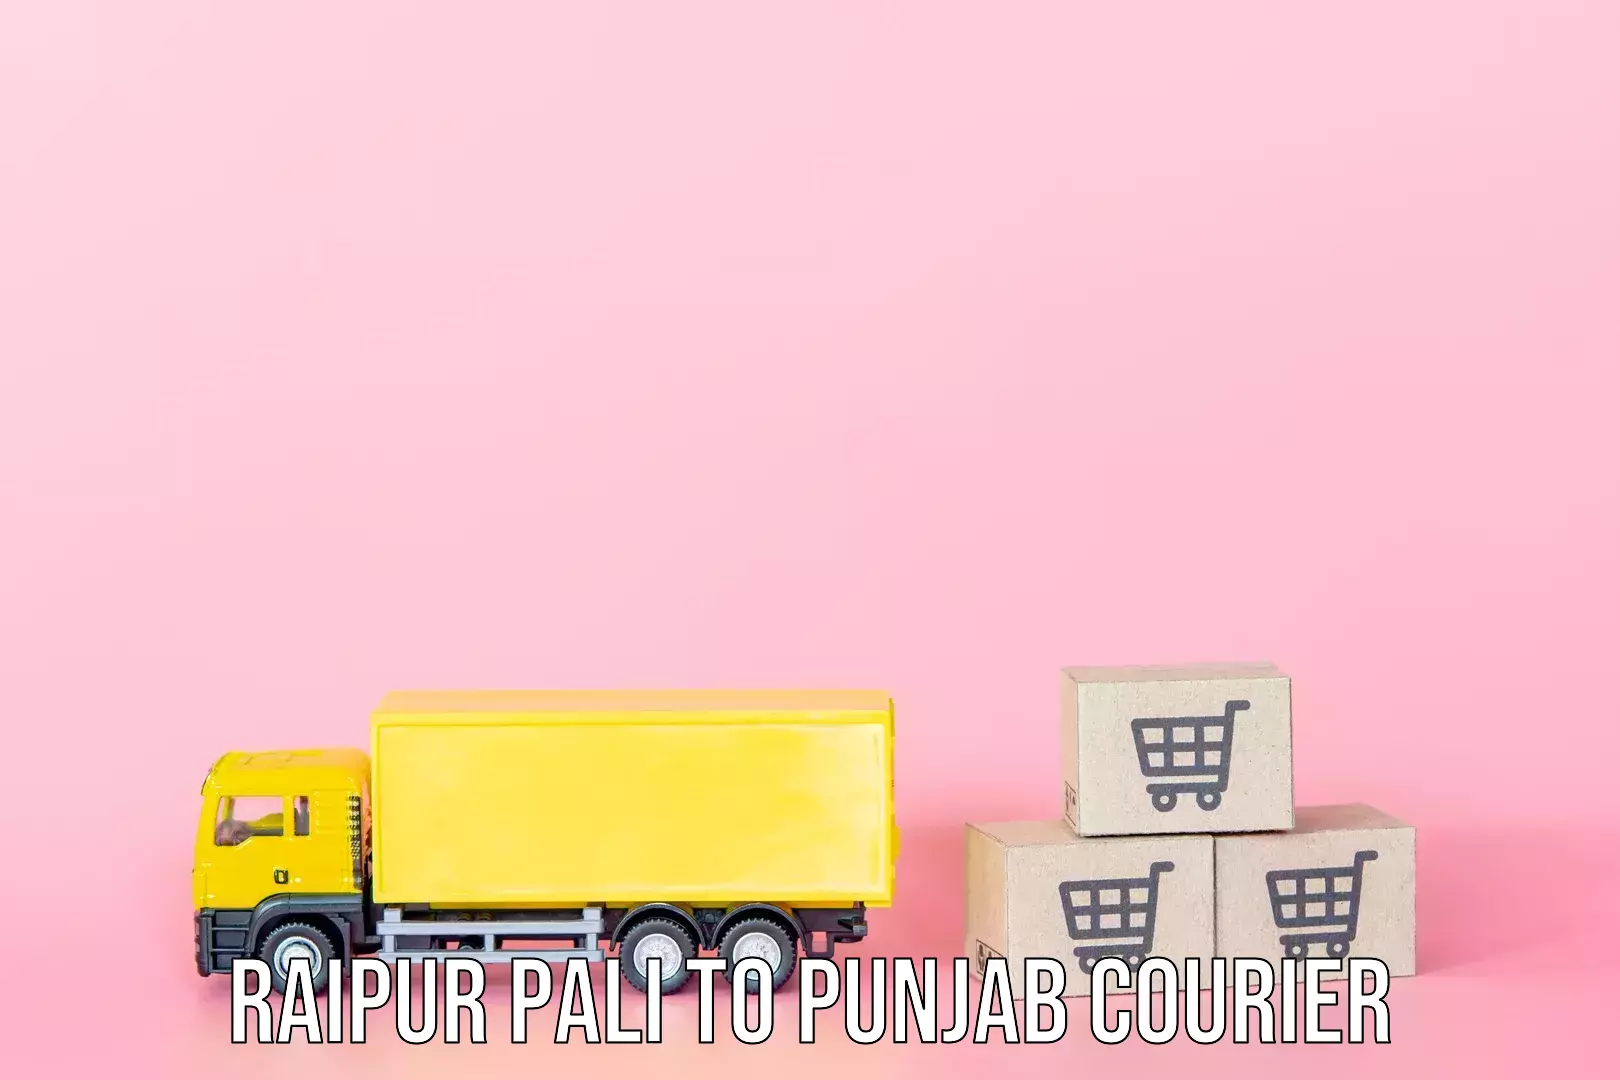 Personal baggage courier Raipur Pali to Amritsar